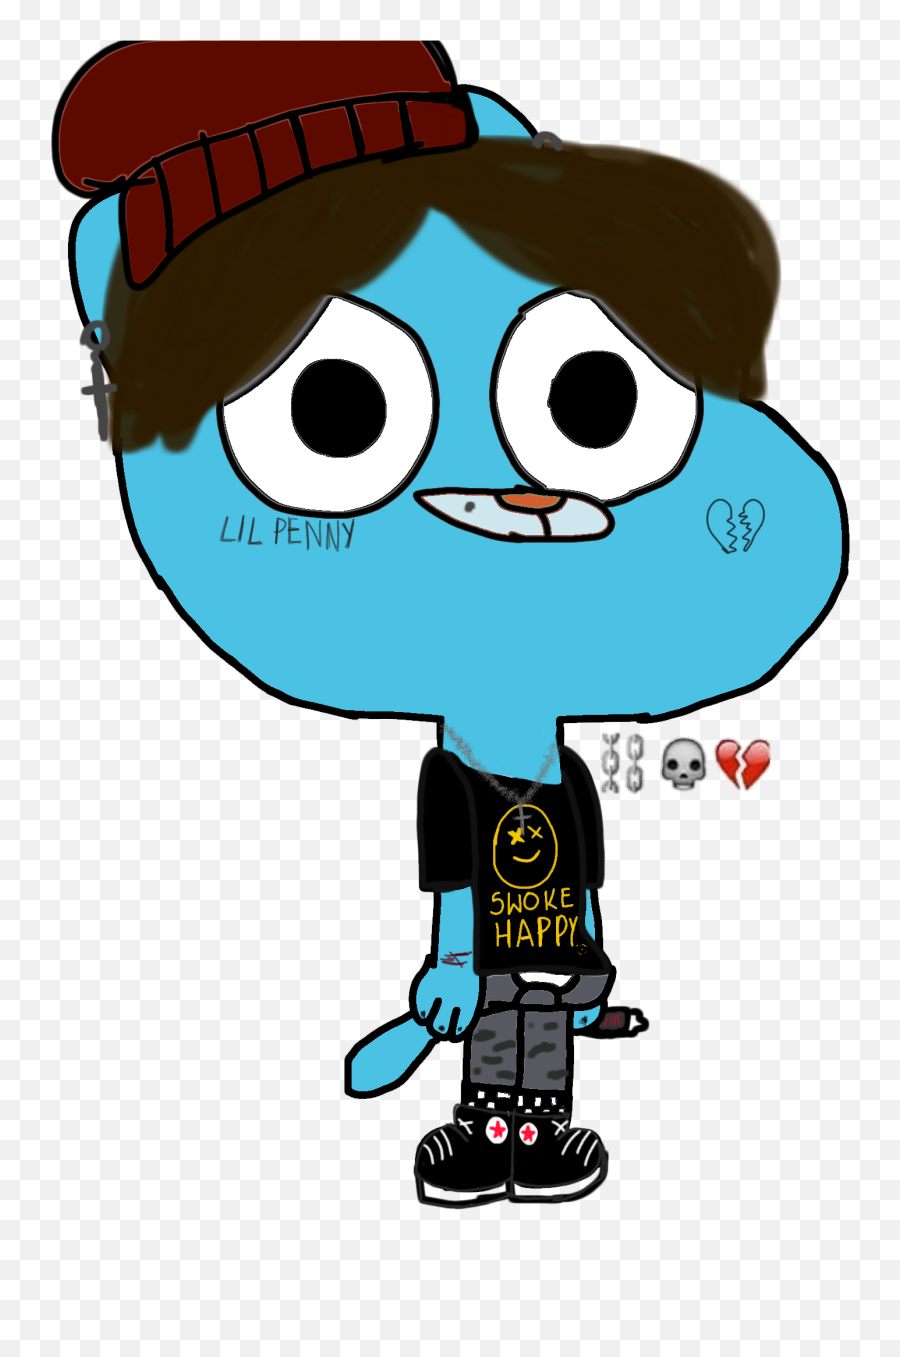 Gumball - Fictional Character Emoji,The Amazing World Of Gumball Gumball Showing His Emotions Episode